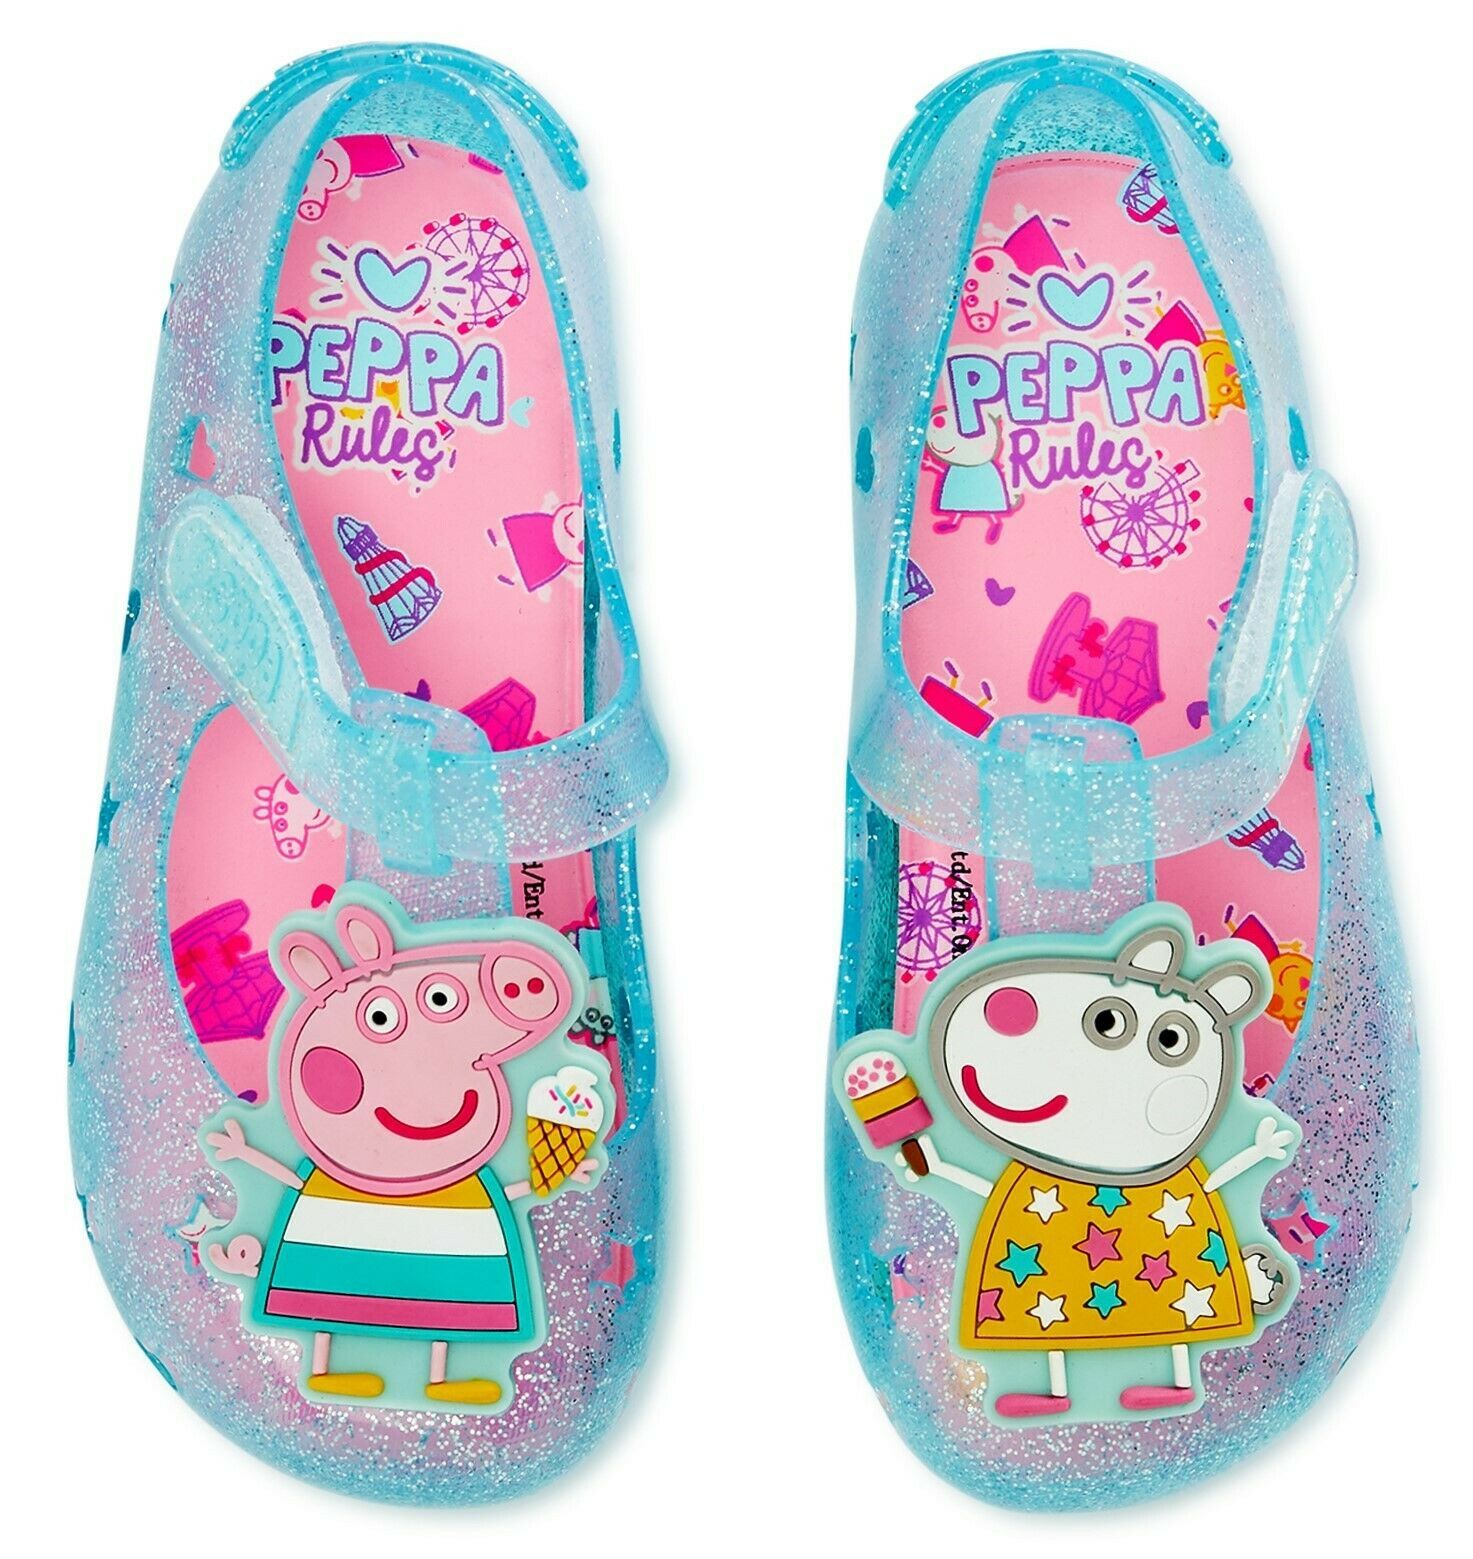 PEPPA PIG SUZY SHEEP Jelly Sandals Toddler's Sz. 7, 8, 9, 10 or Girls 11, 12 NWT